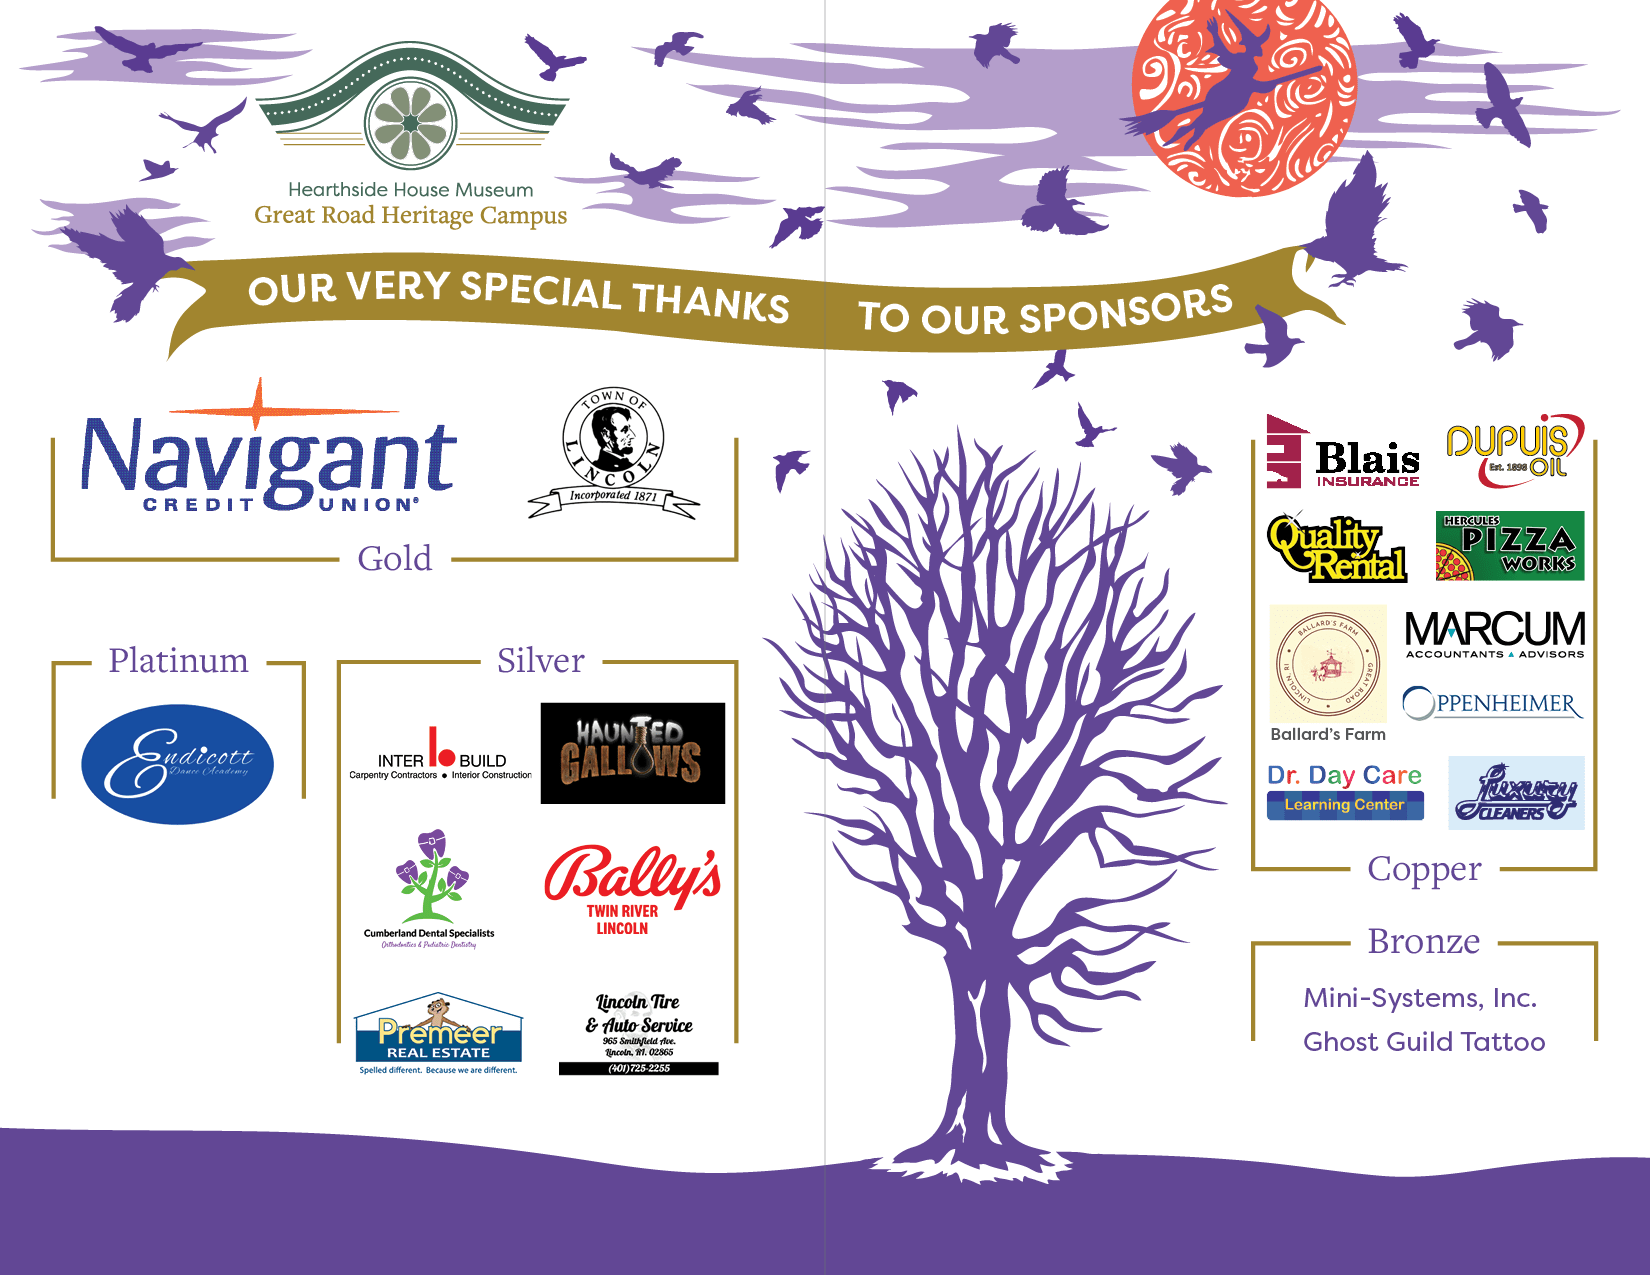 Design of a spread in the BeWitched & BeDazzled fall festival program thanking the festival sponsors